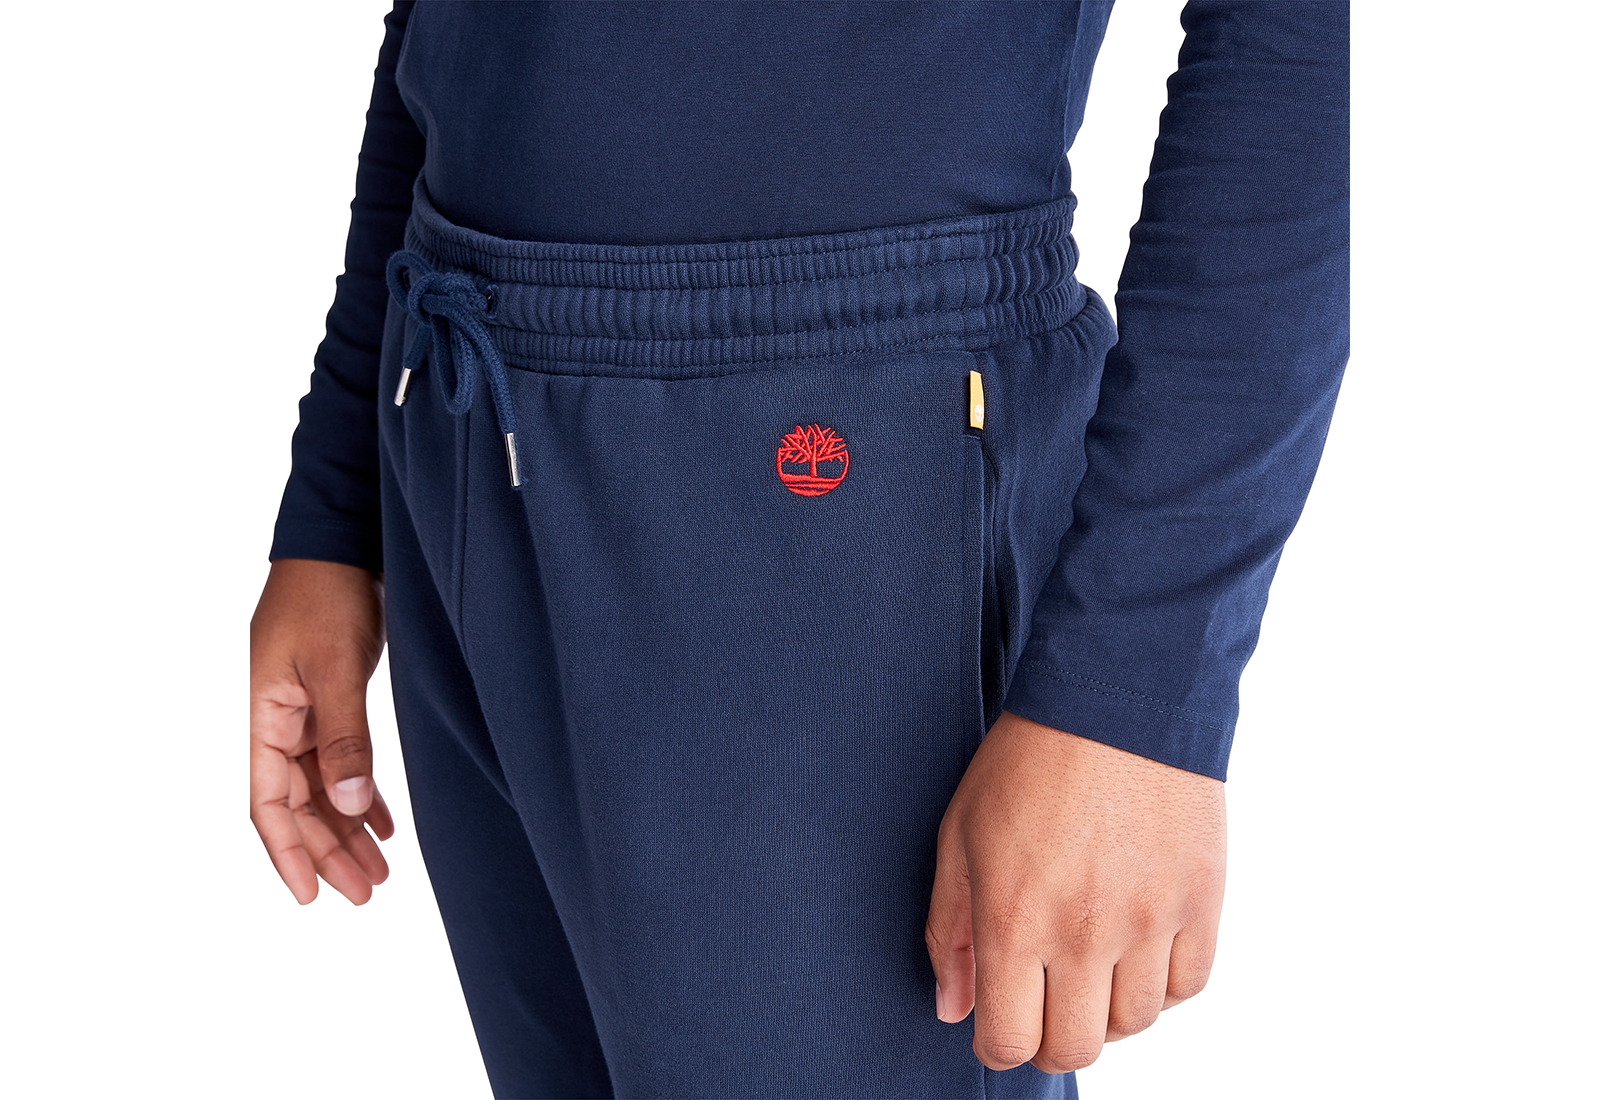 Timberland Oblečenie Exeter Sweatpant